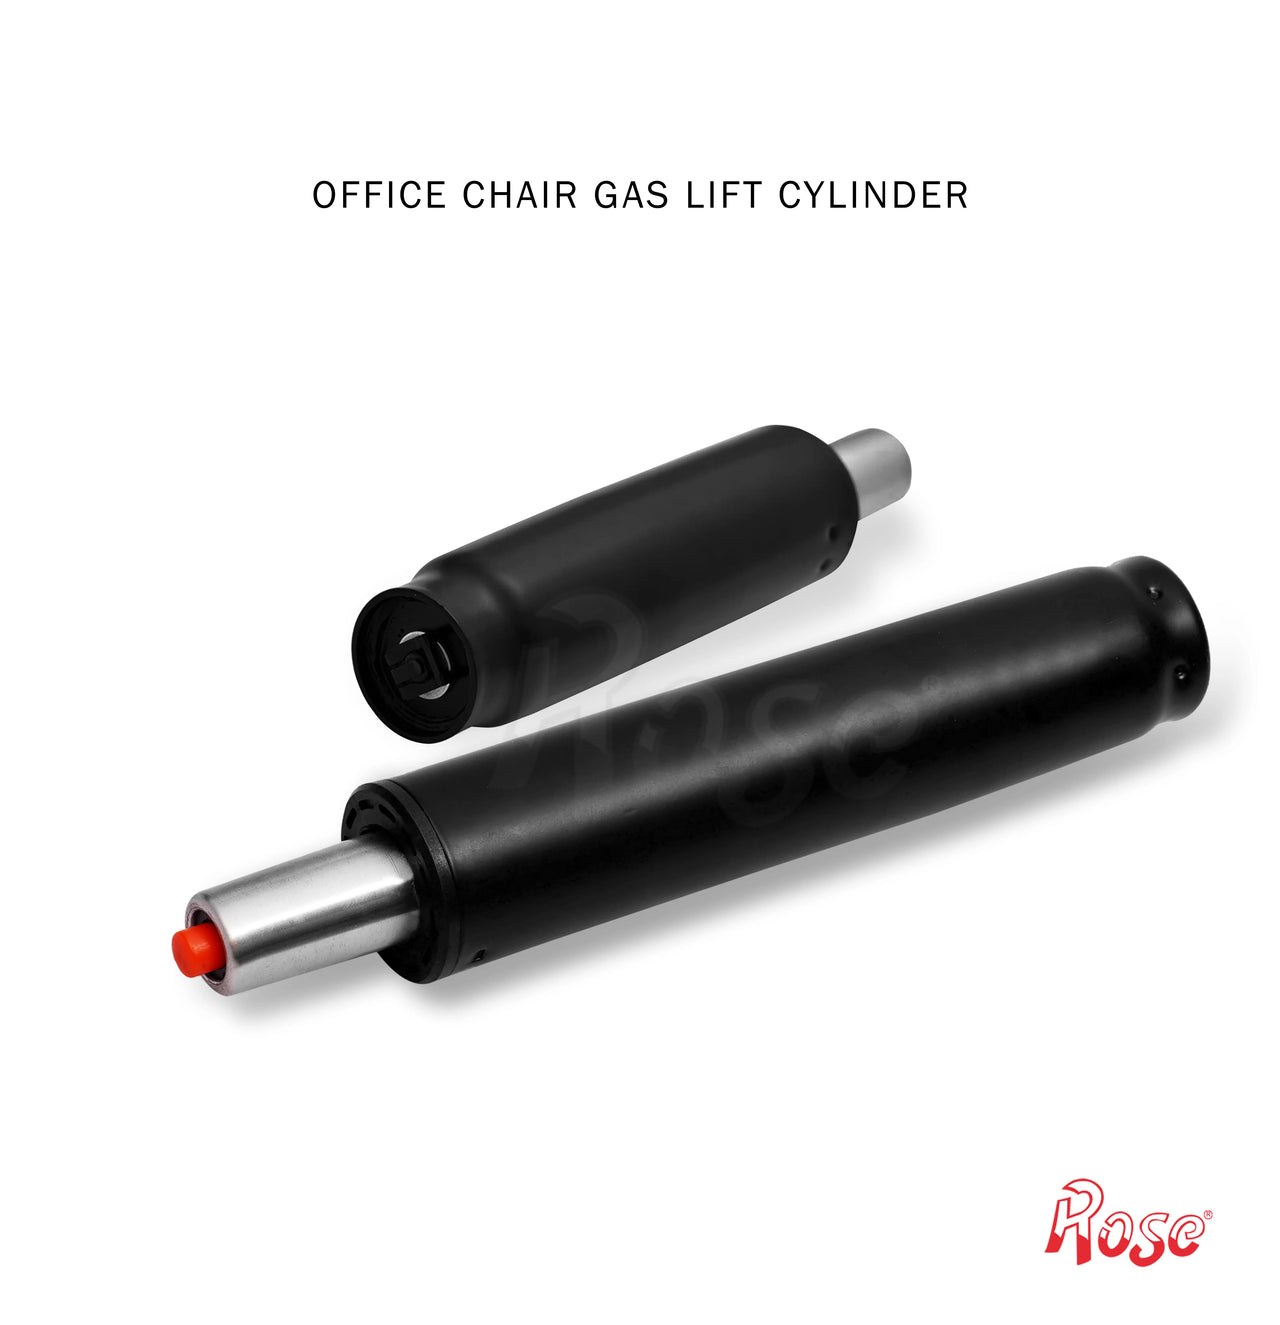 Hydraulic Gas Lift Cylinder Replacement for High & Low Back Office Chairs